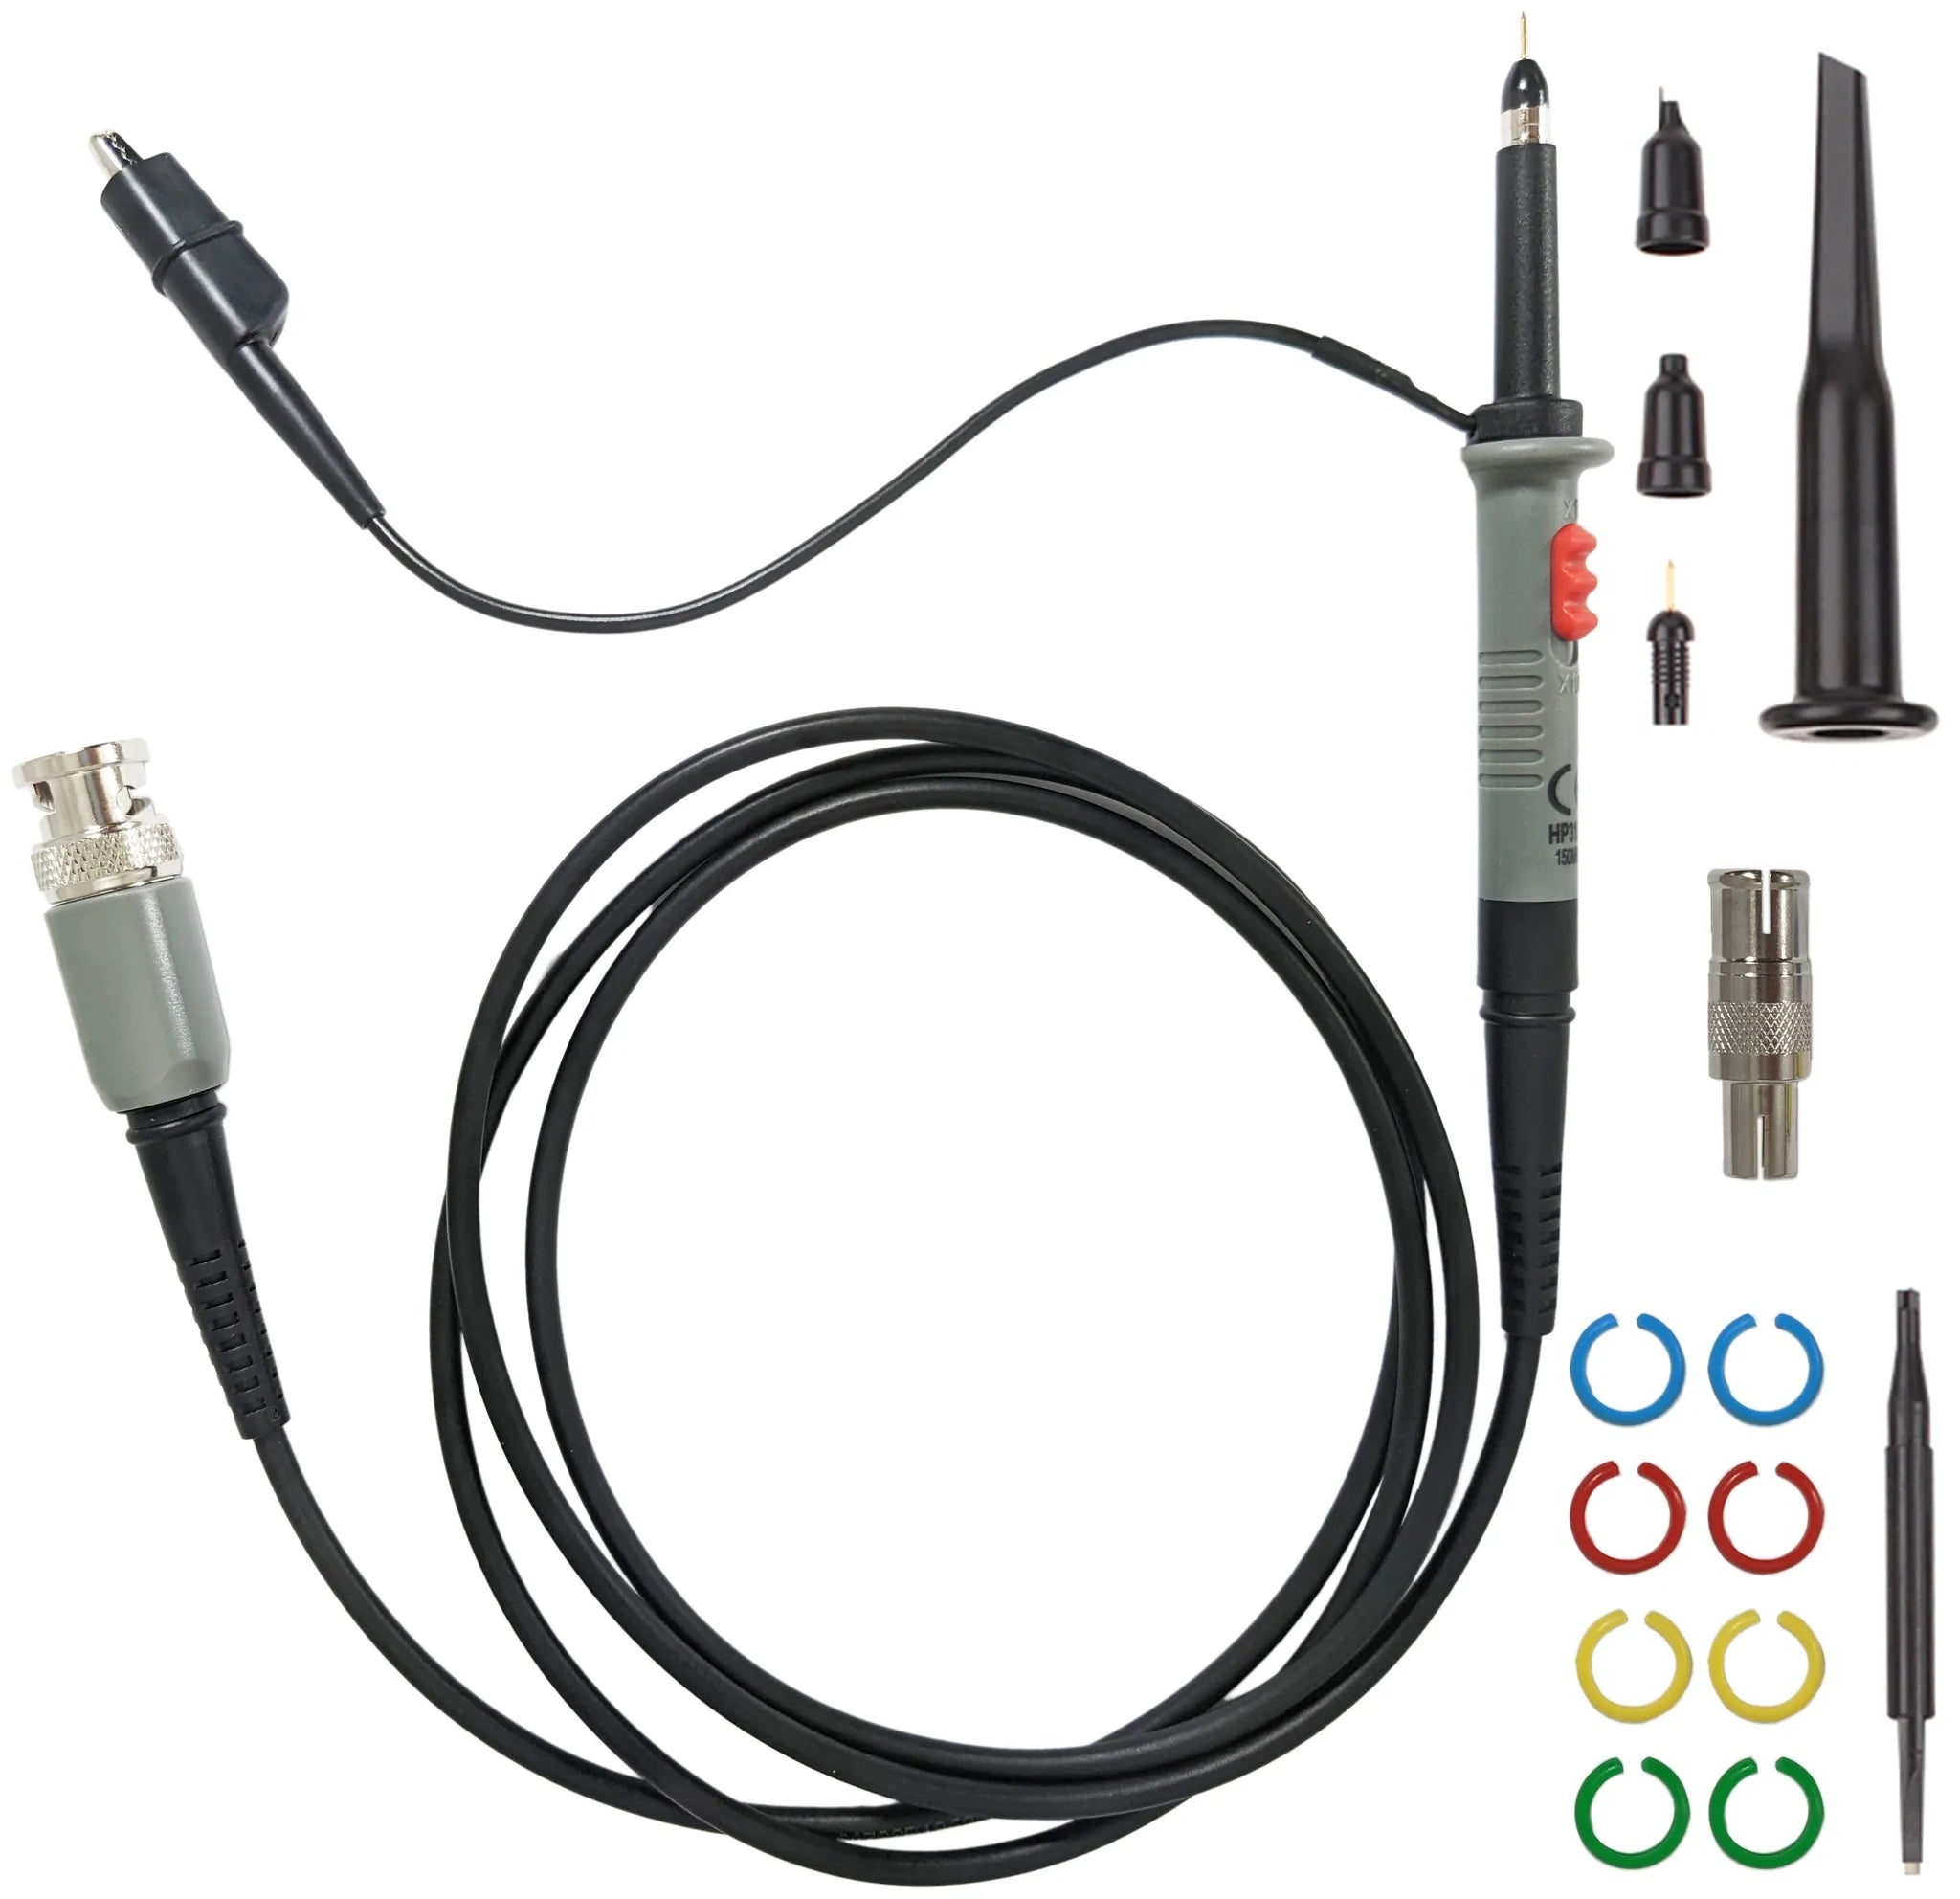 Differential Probe 1x/10x/100x Oscilloscope Accessories for Electronic  Engineers